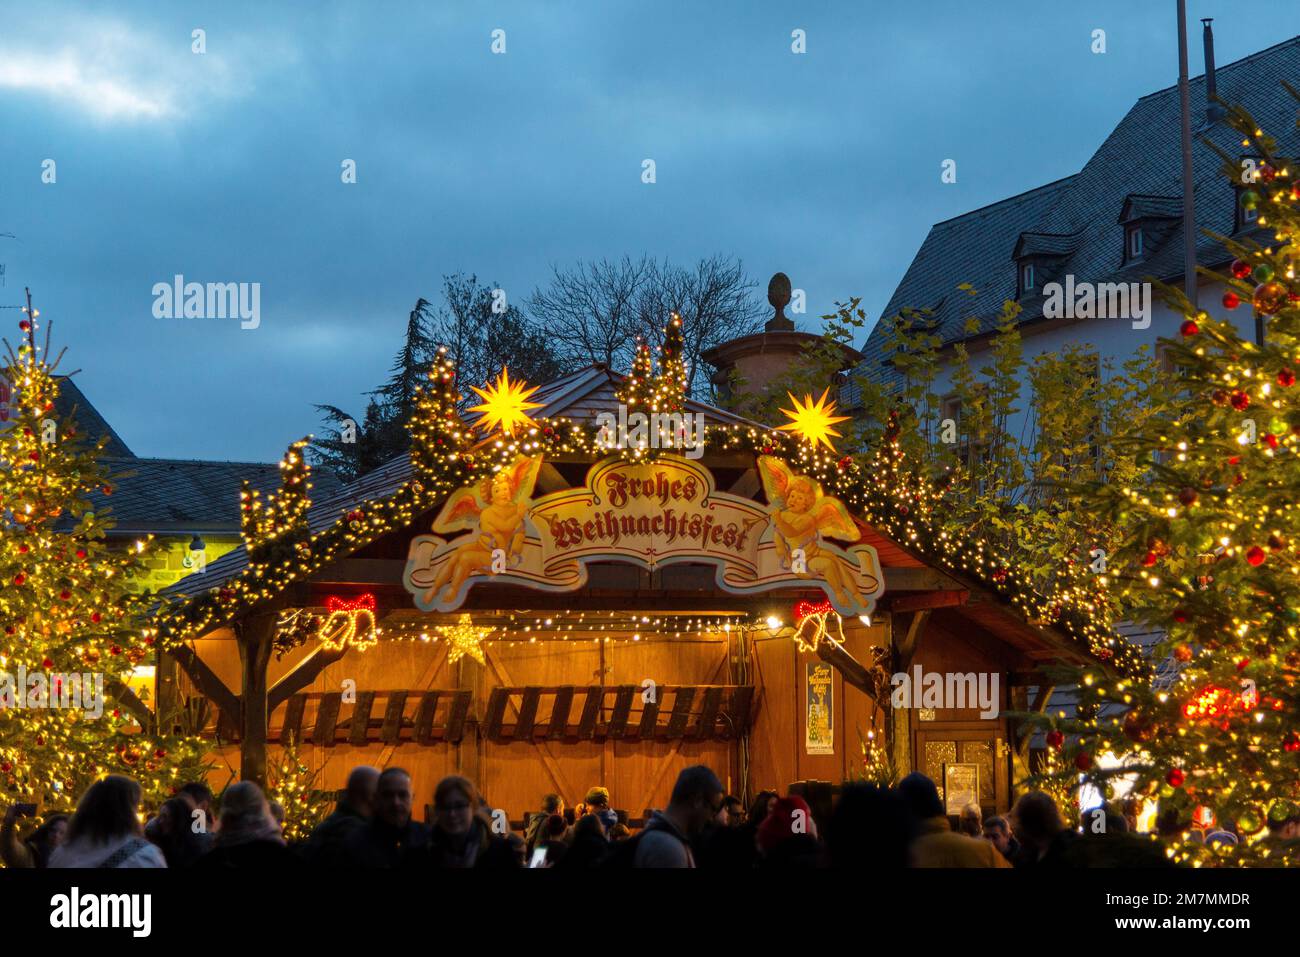 The Christmas market at Trier's main market square illuminated by Christmas lights in the darkness Stock Photo